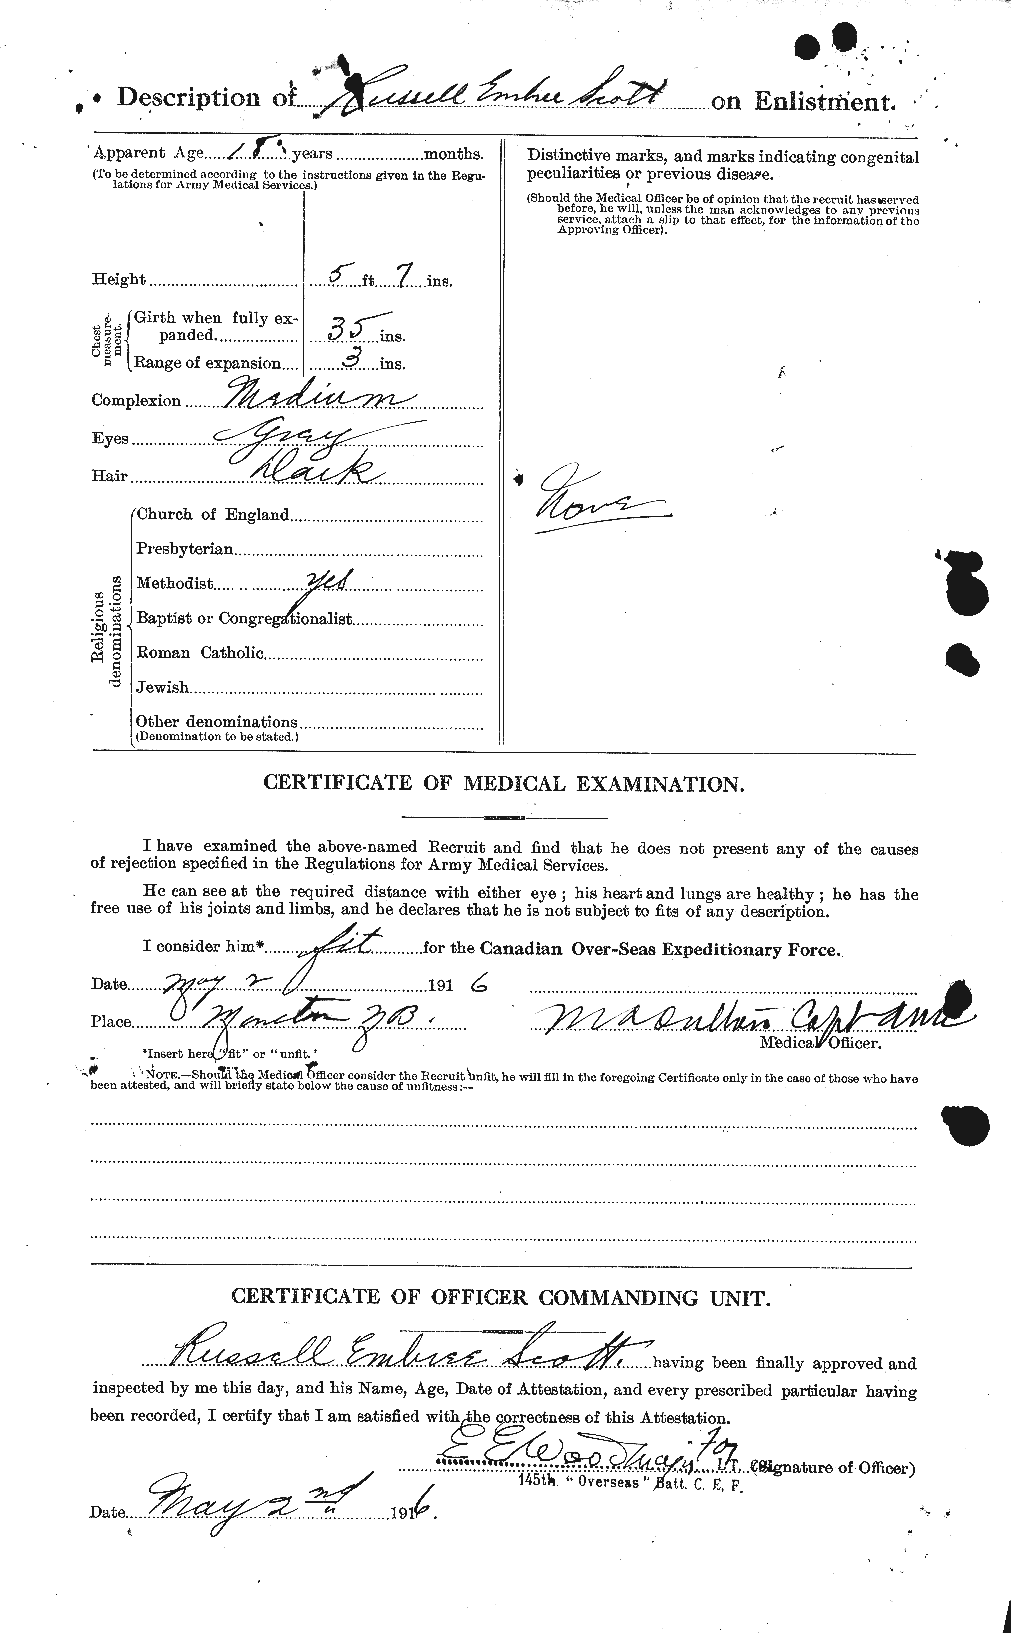 Personnel Records of the First World War - CEF 088877b